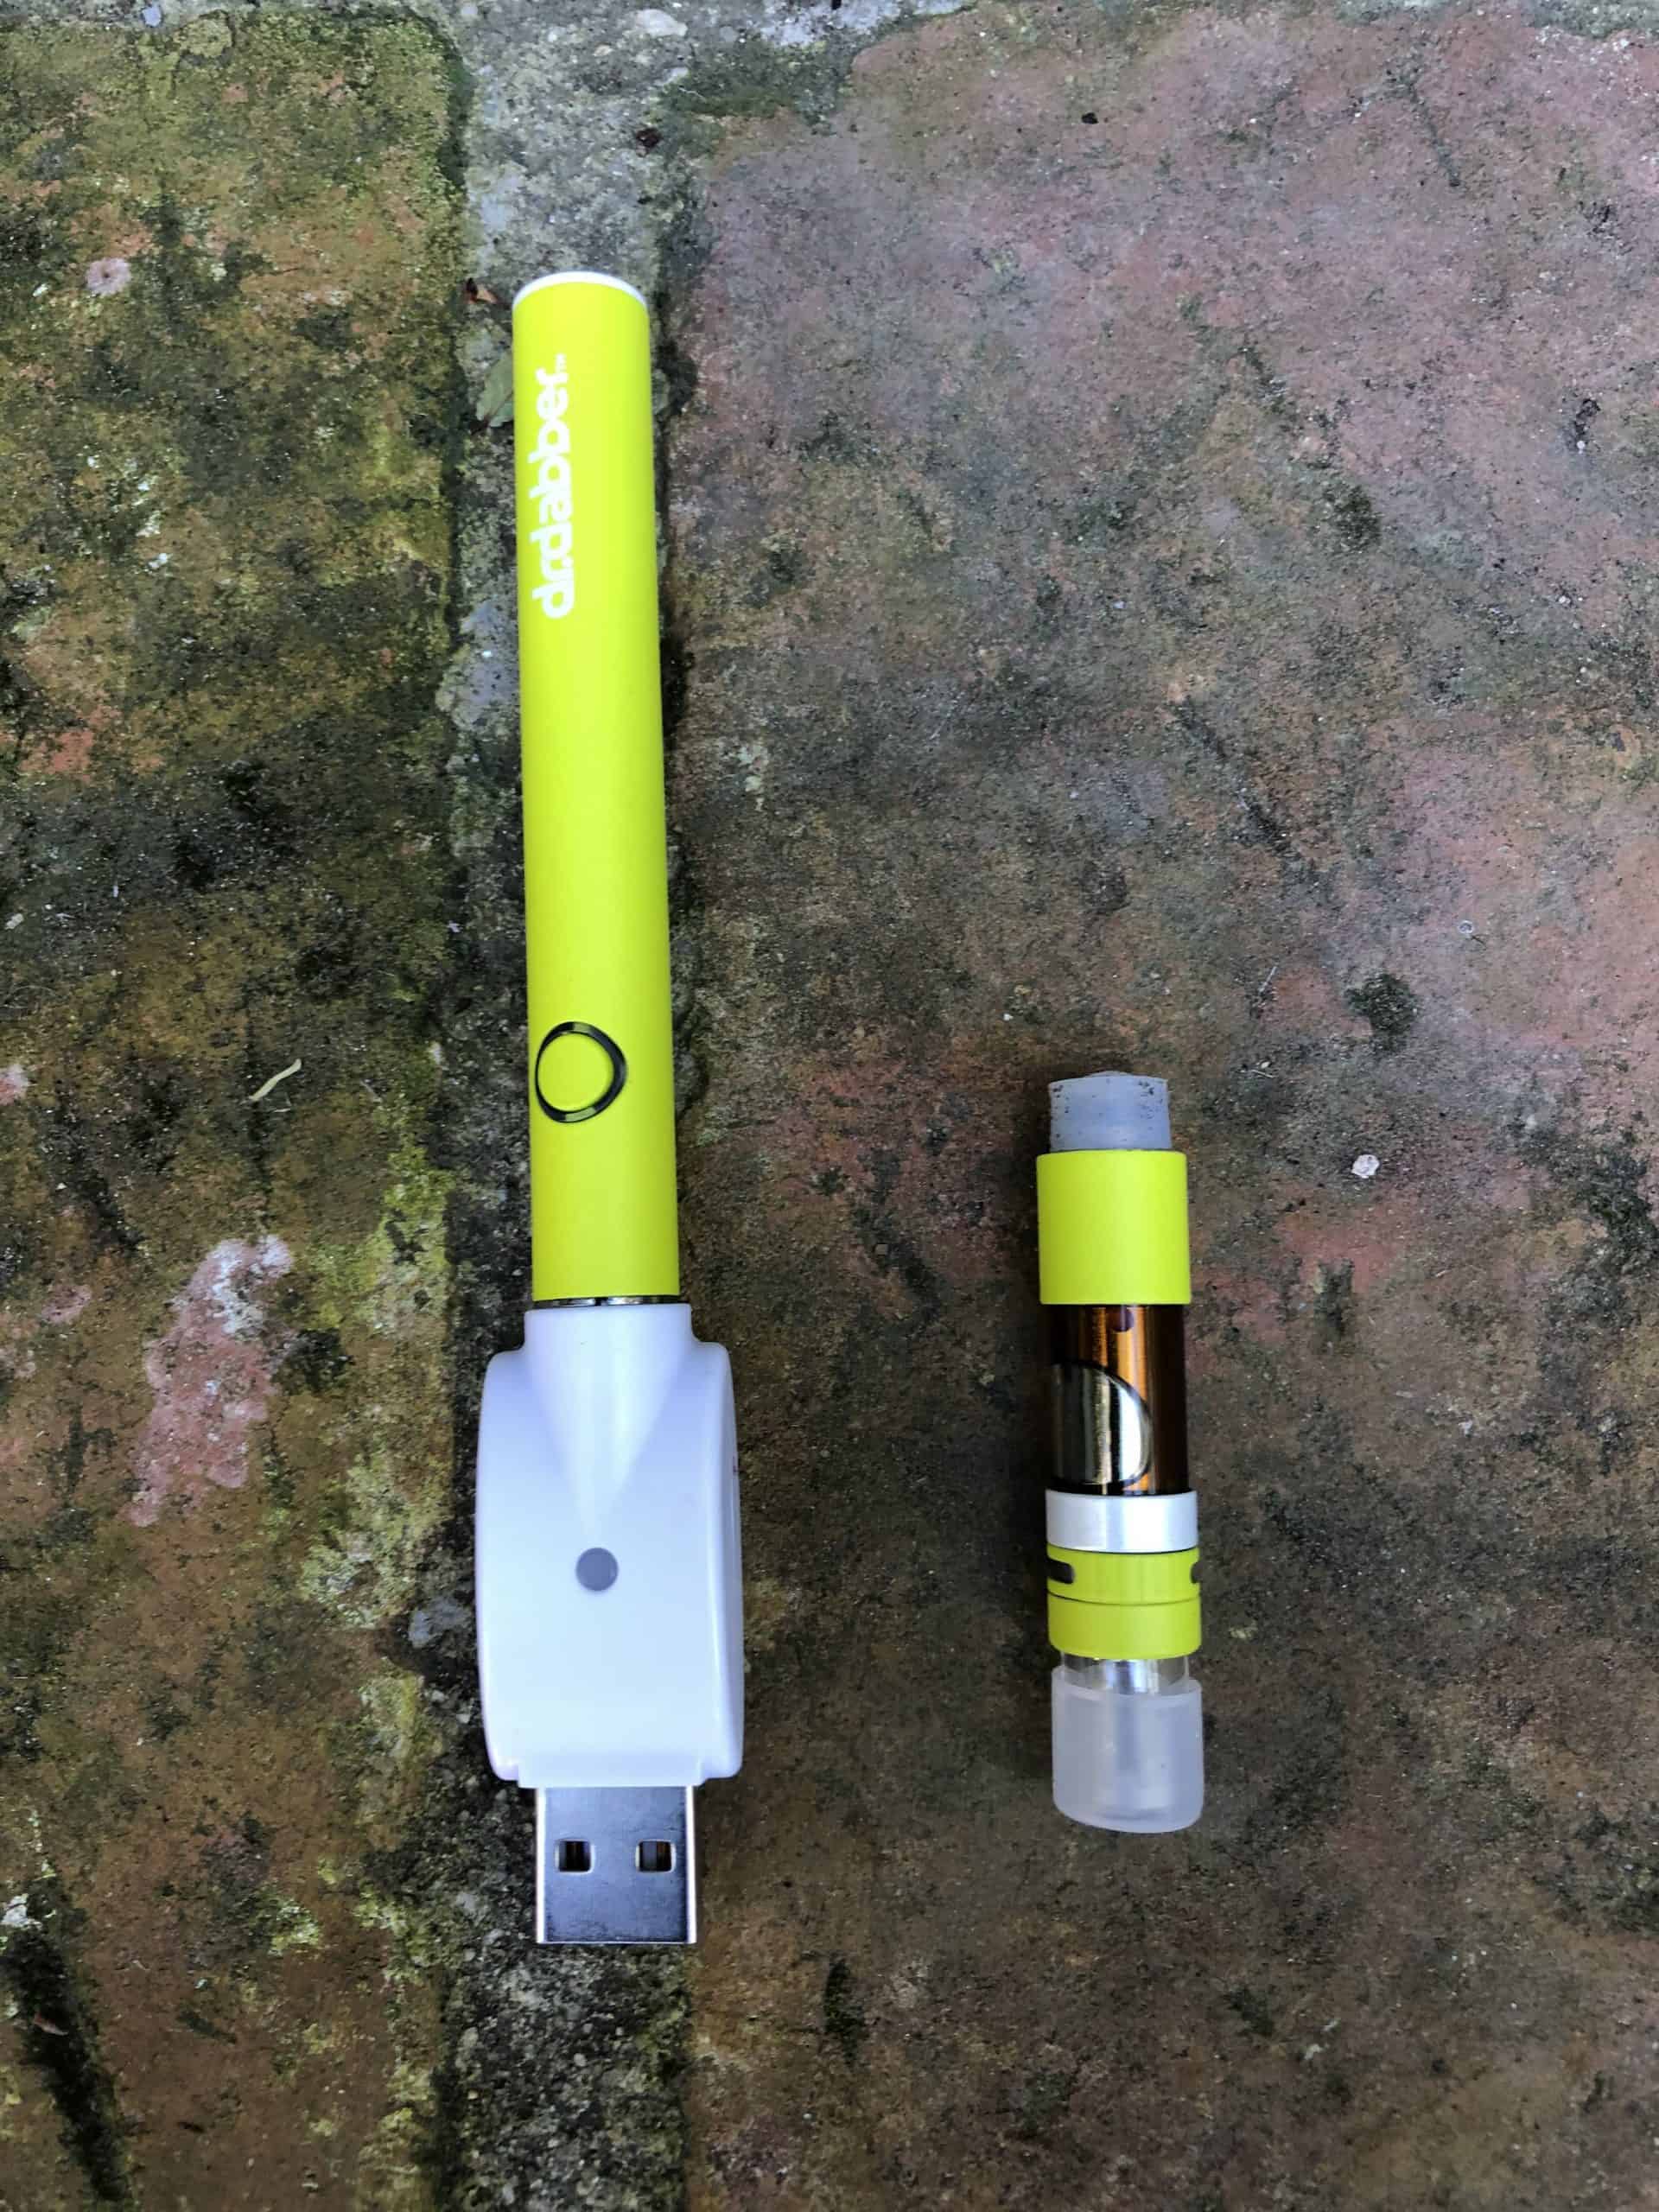  cbd cartridge and battery combo fresh blend save on cannabis review specifications.